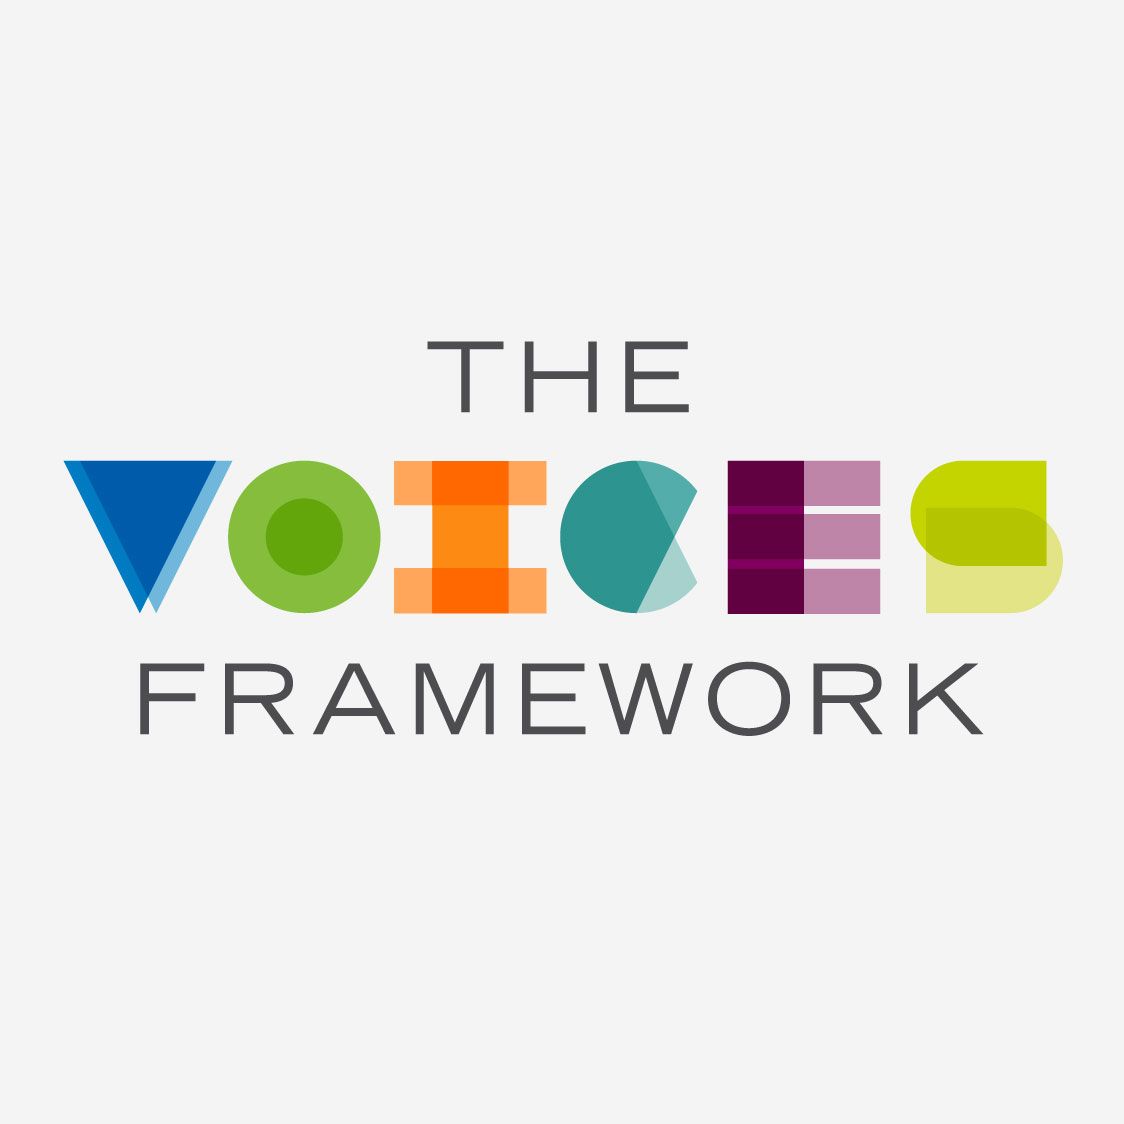 Logo for The Voices Framework. VOICES is in colorful letters, made up of abstract shapes.